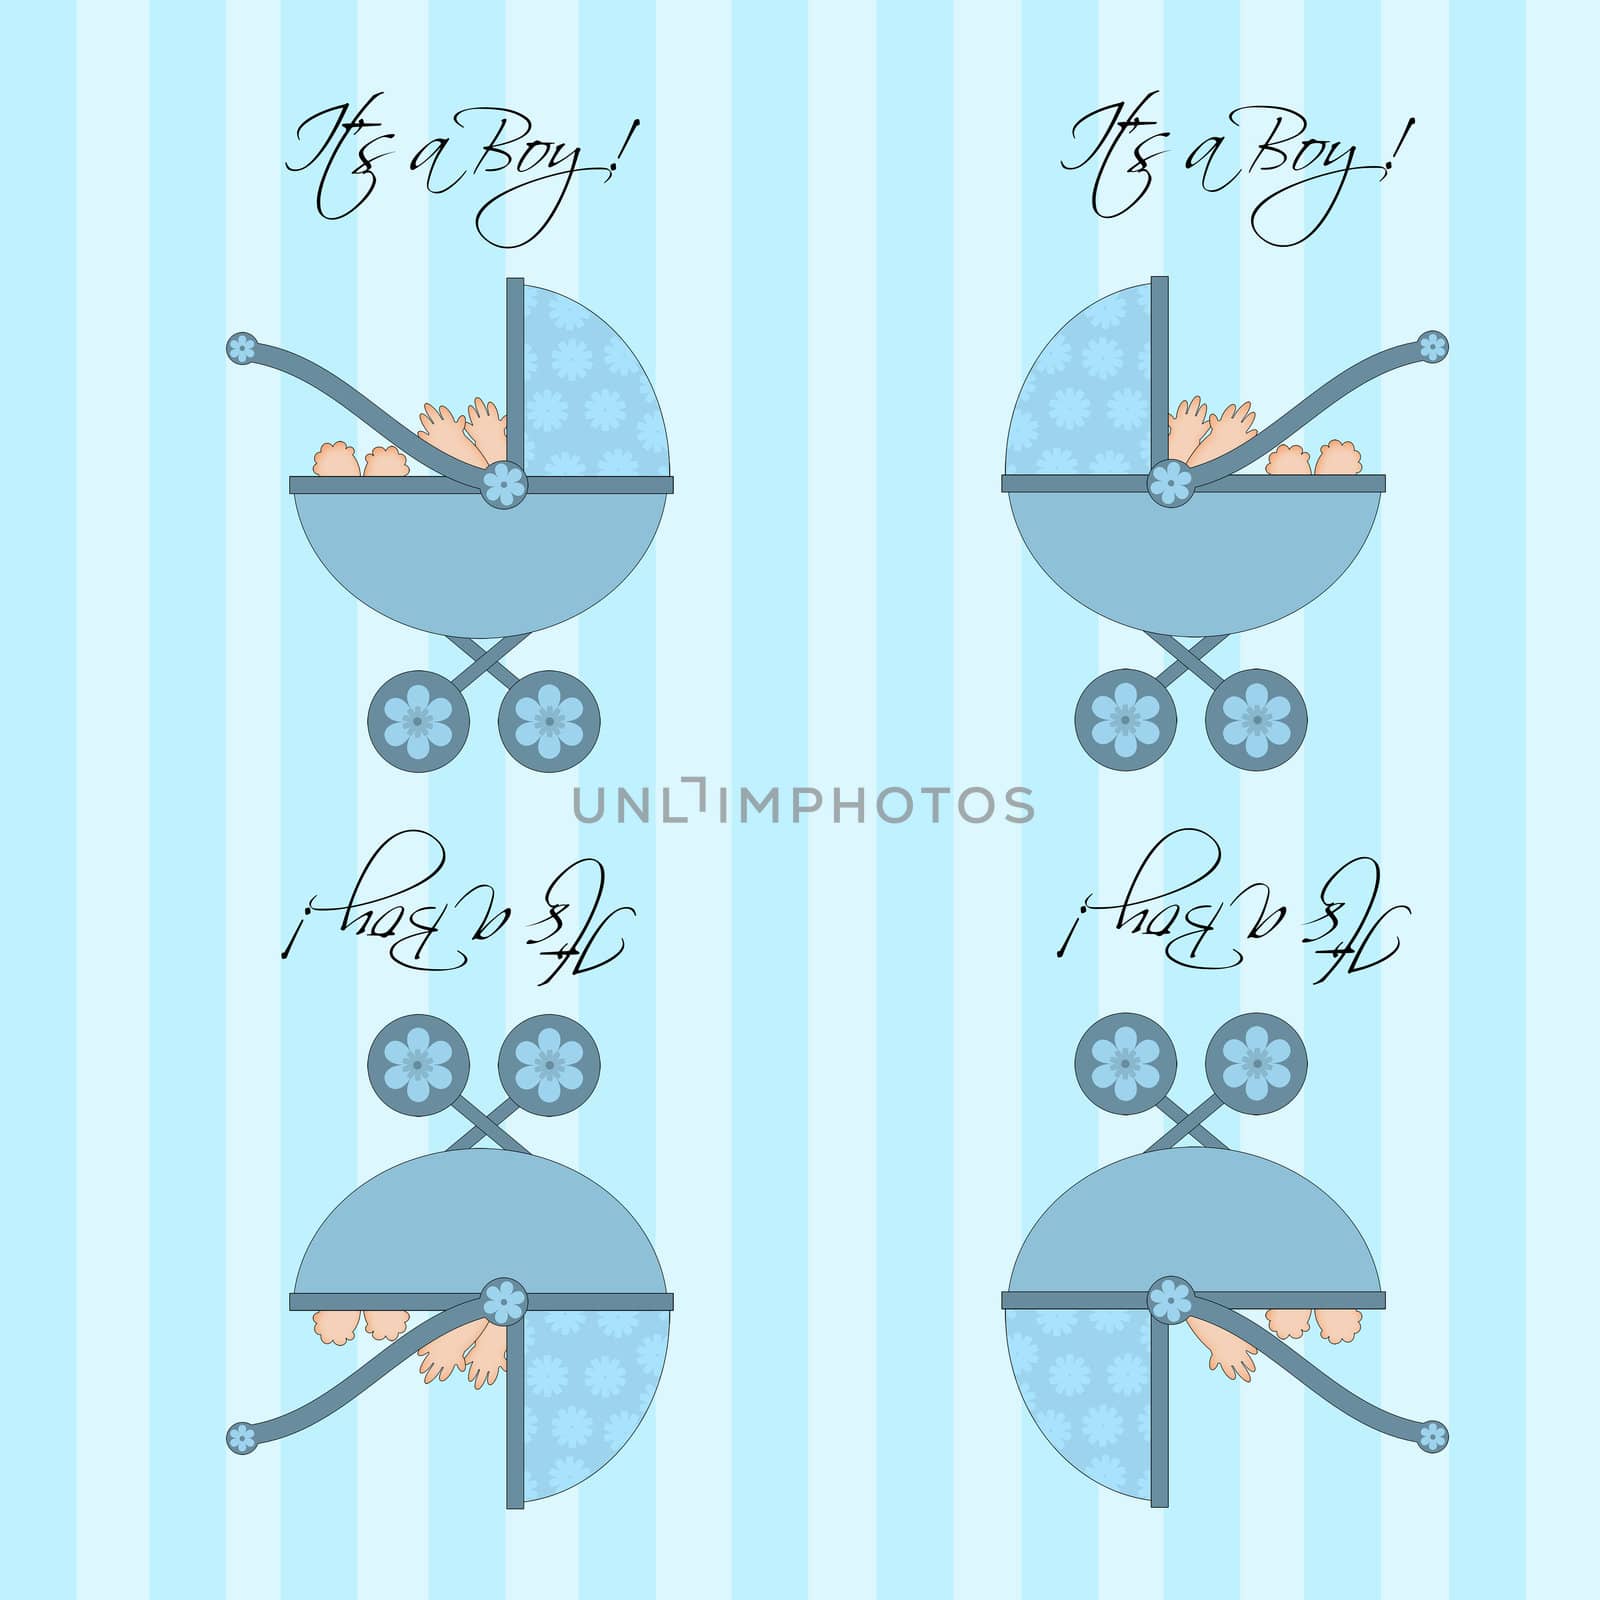 Its A Boy Blue Baby Pram Carriage Seamless Pattern Tile Background Illustration